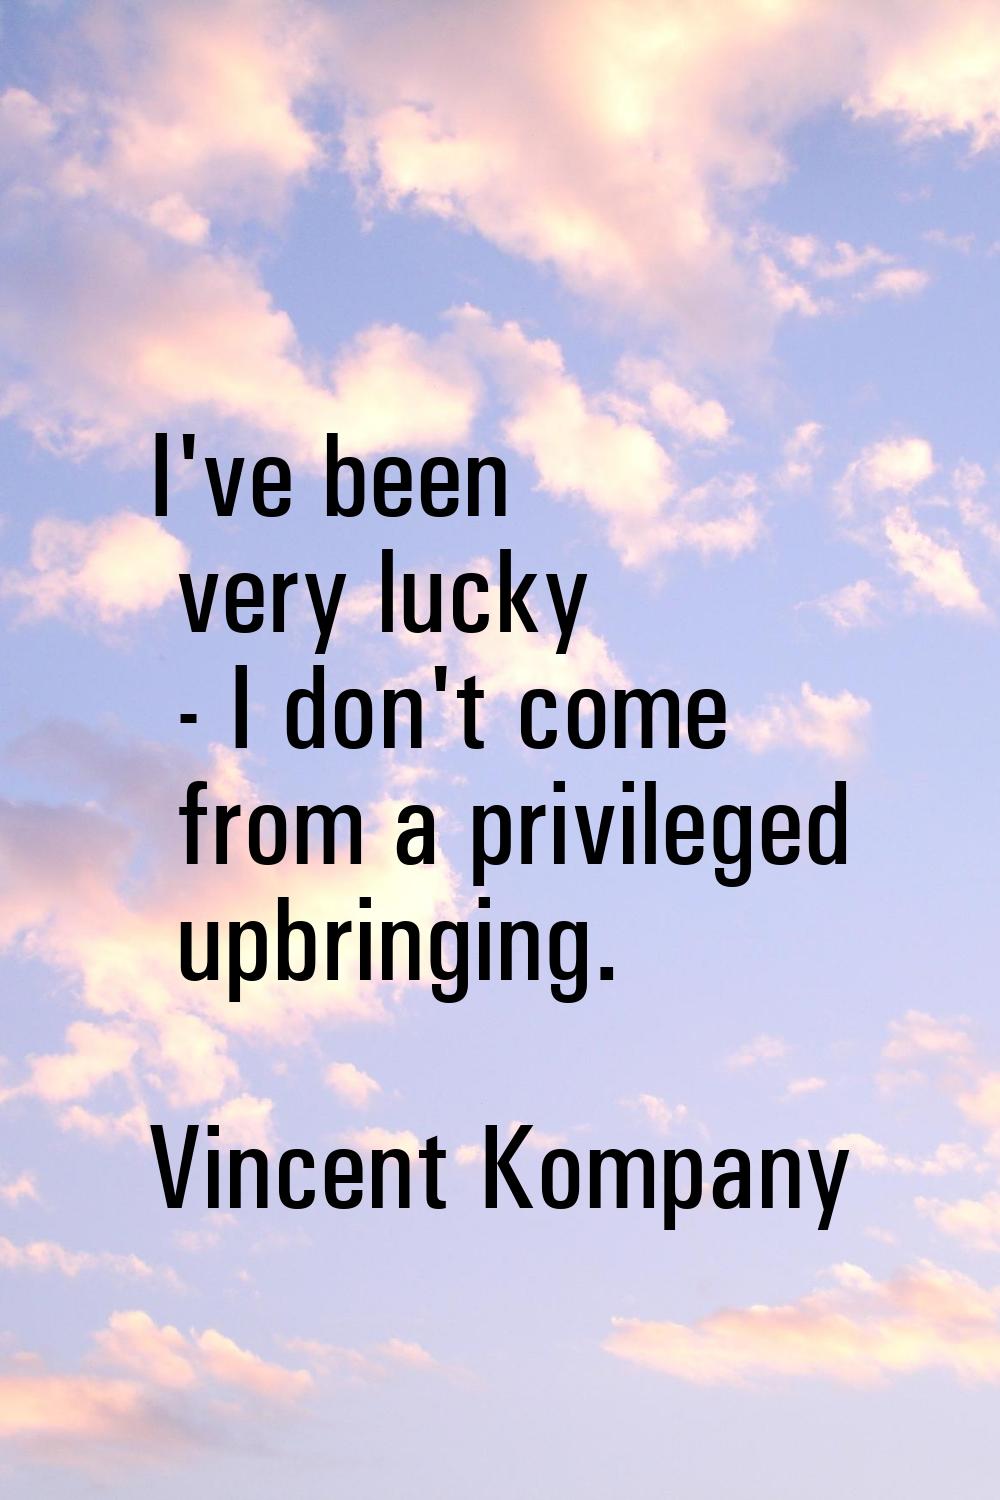 I've been very lucky - I don't come from a privileged upbringing.